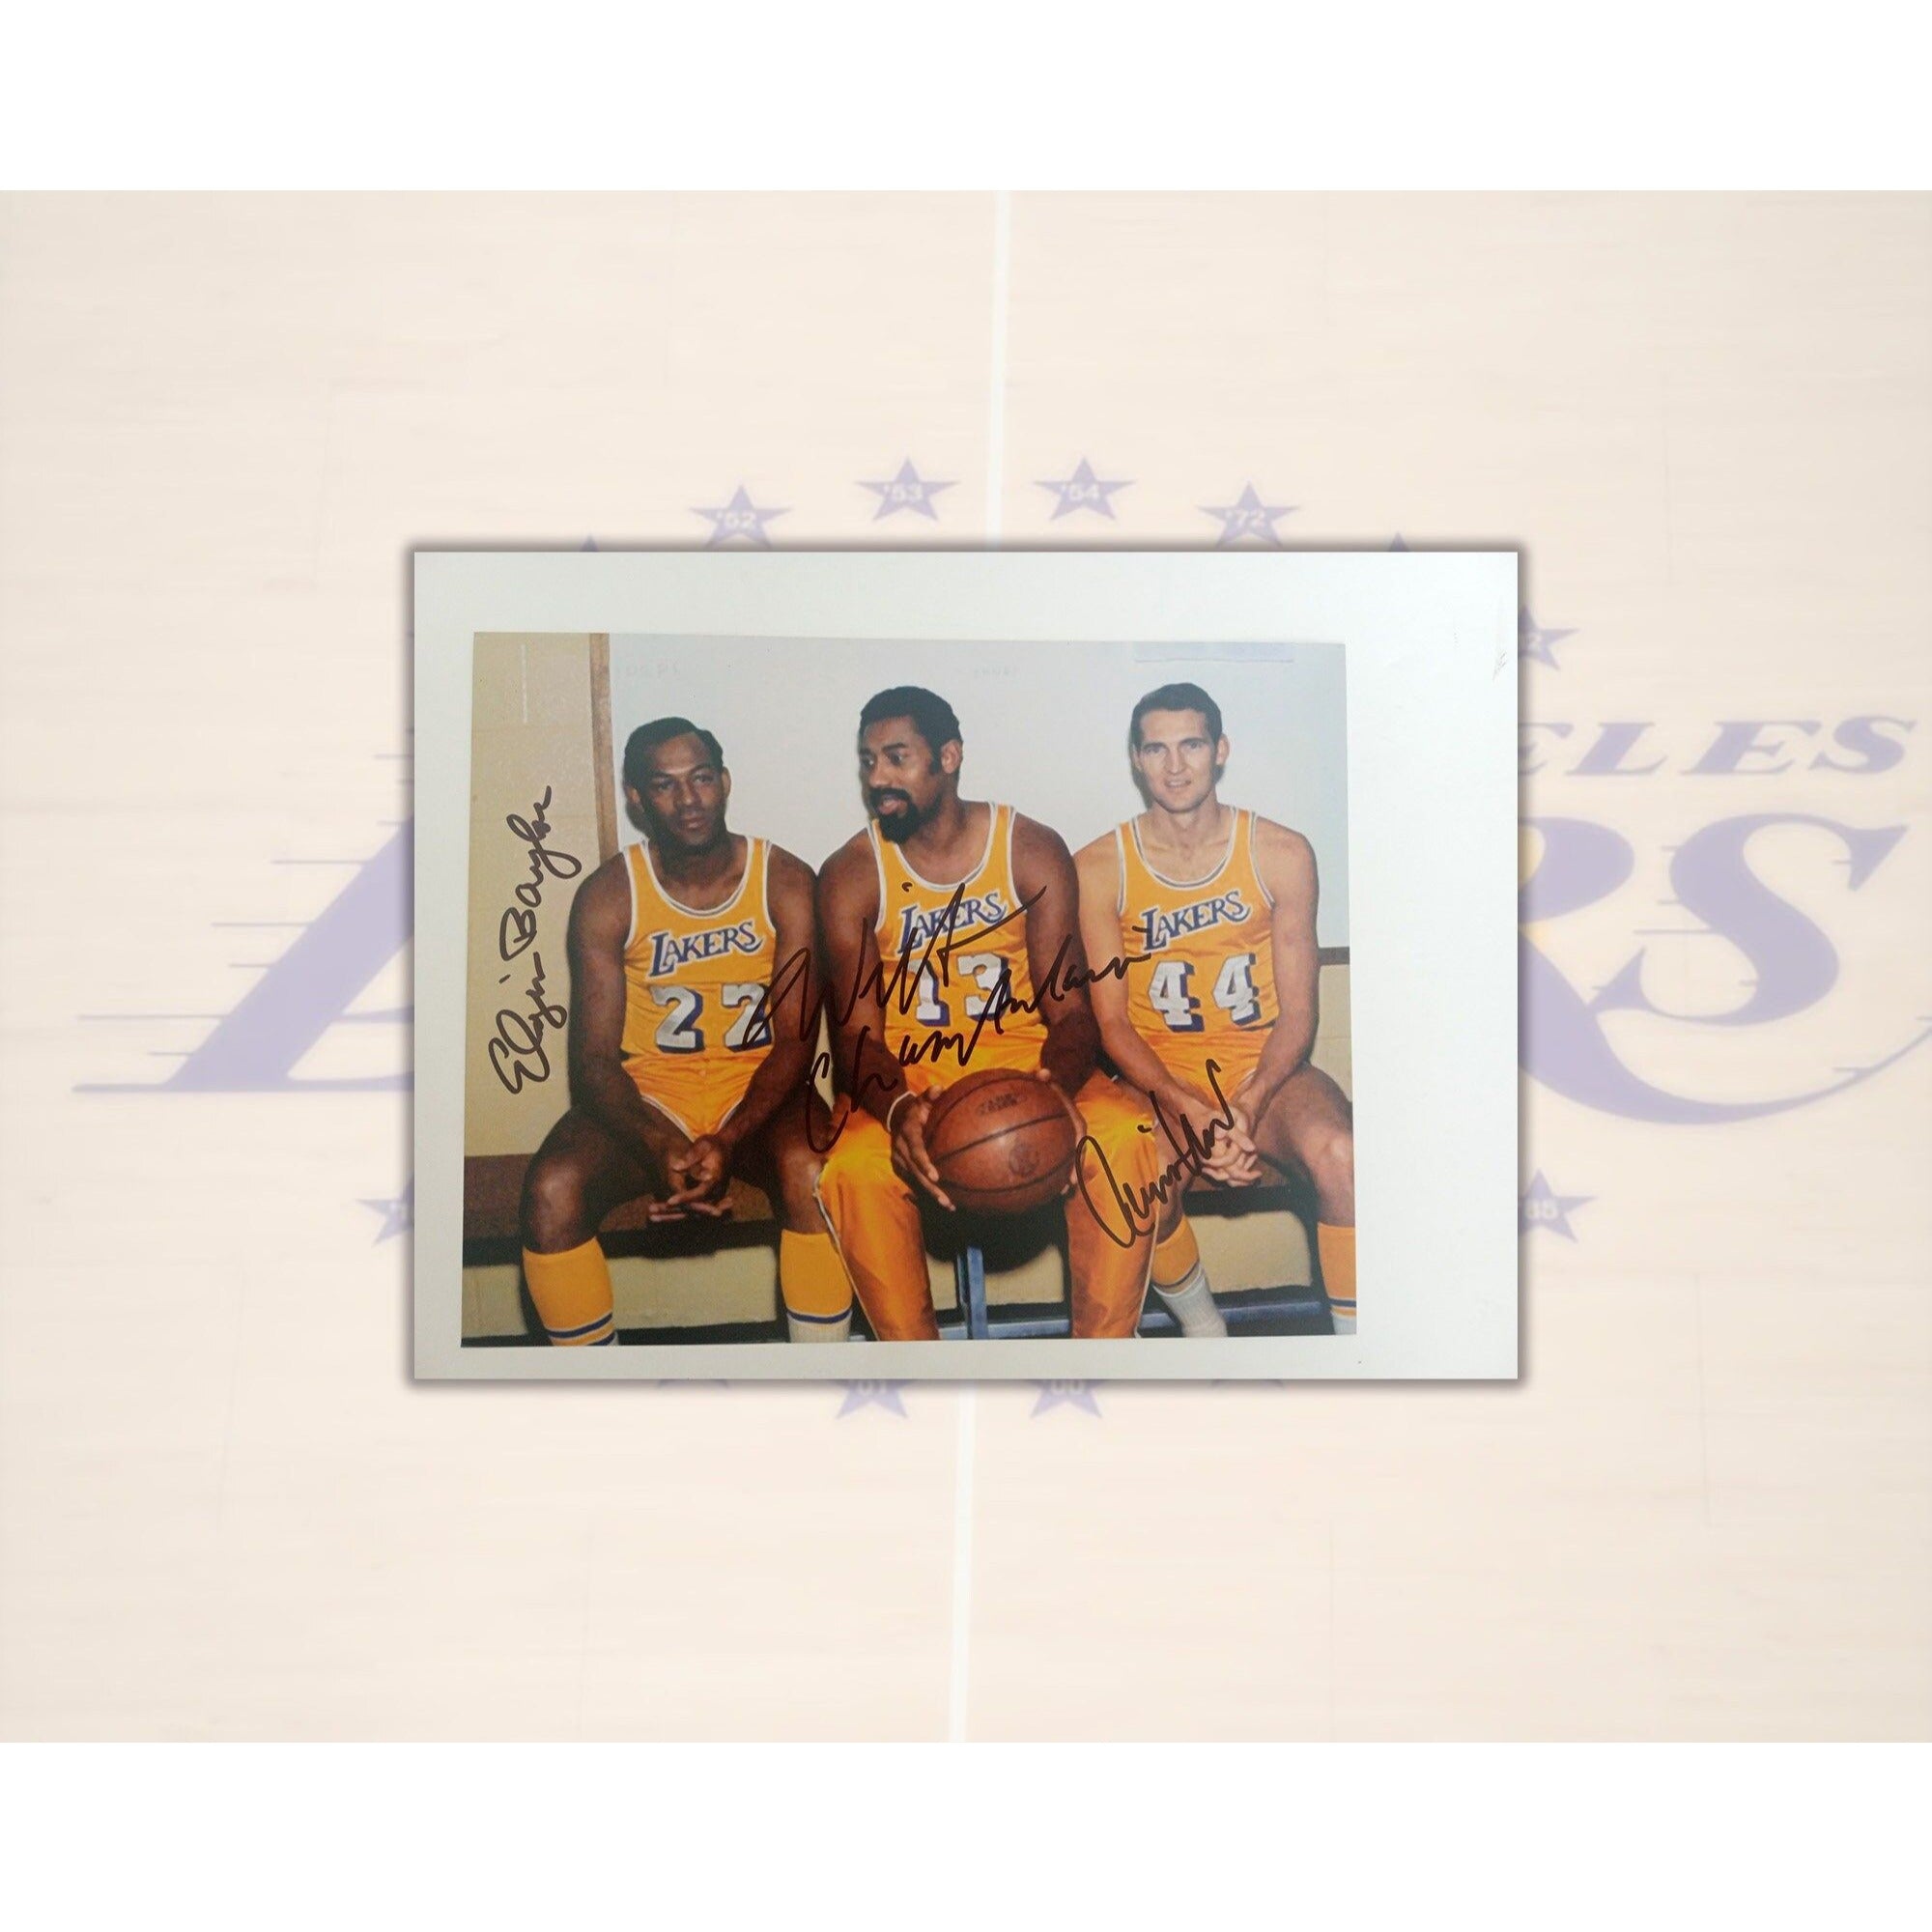 Wilt Chamberlain, Elgin Baylor, Jerry West 8 x 10 signed photo with proof